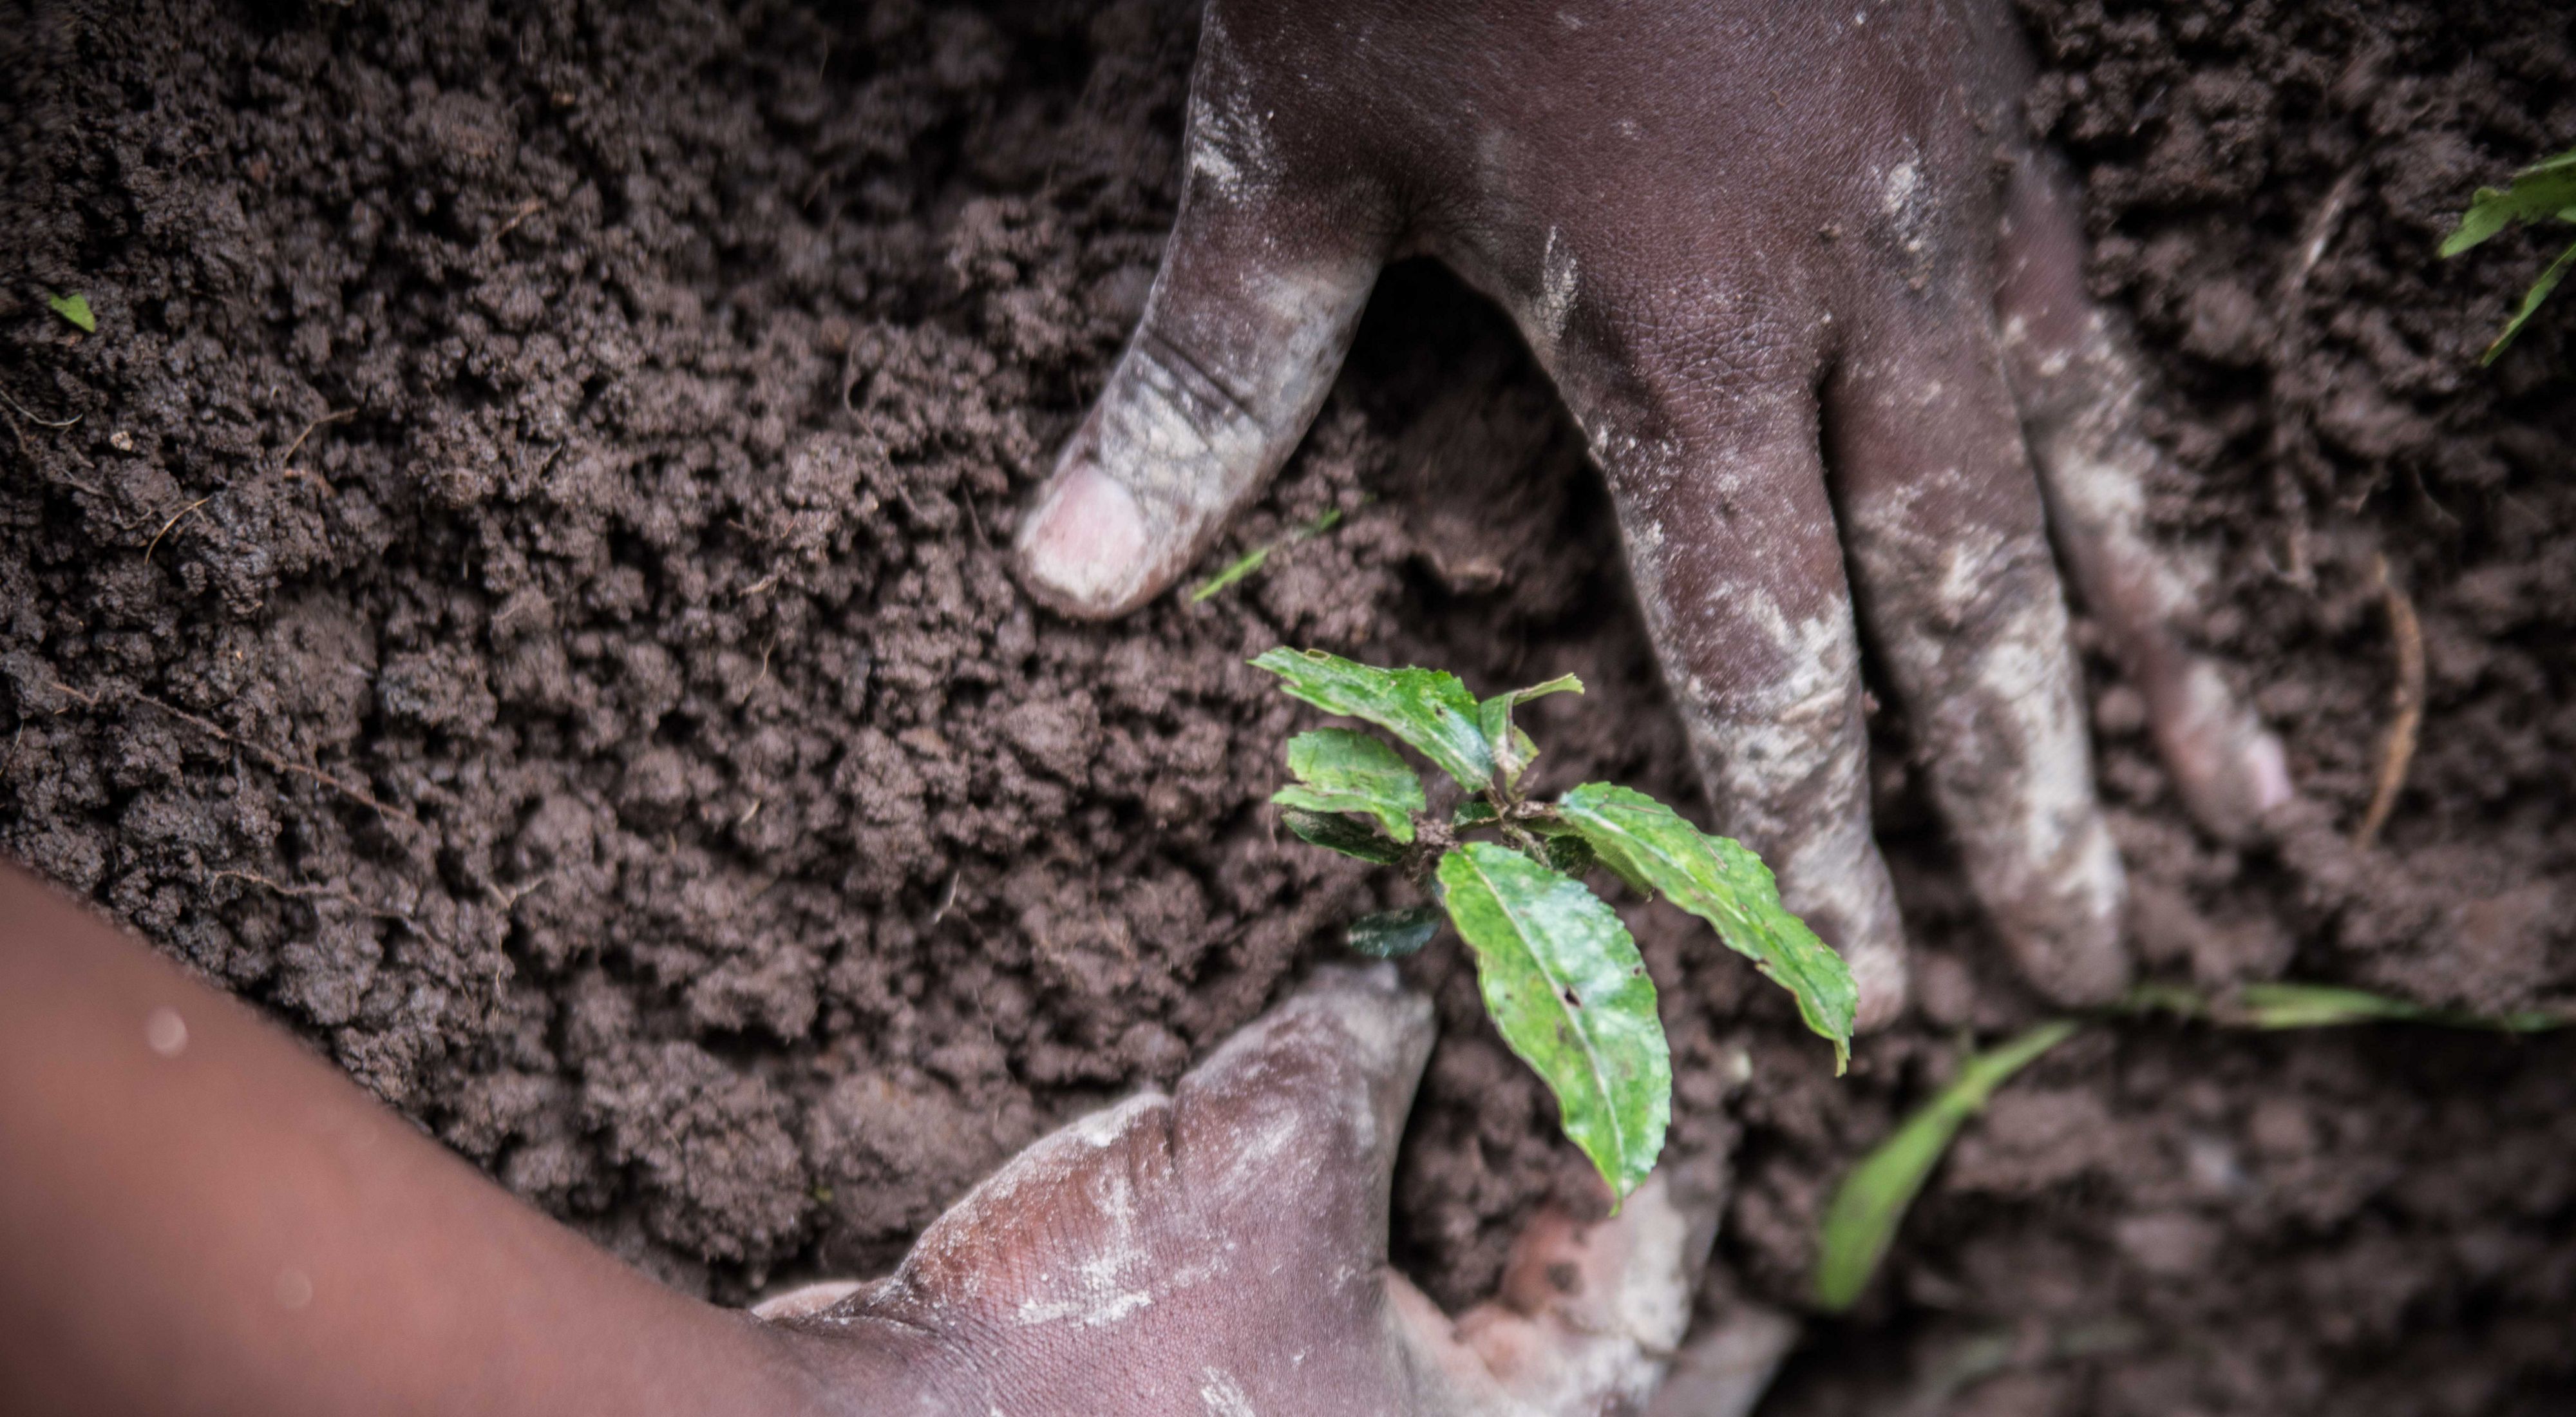 TNC Kenya's team planted 2,000 seedlings at a secondary school and three neighboring farms in Kenya.